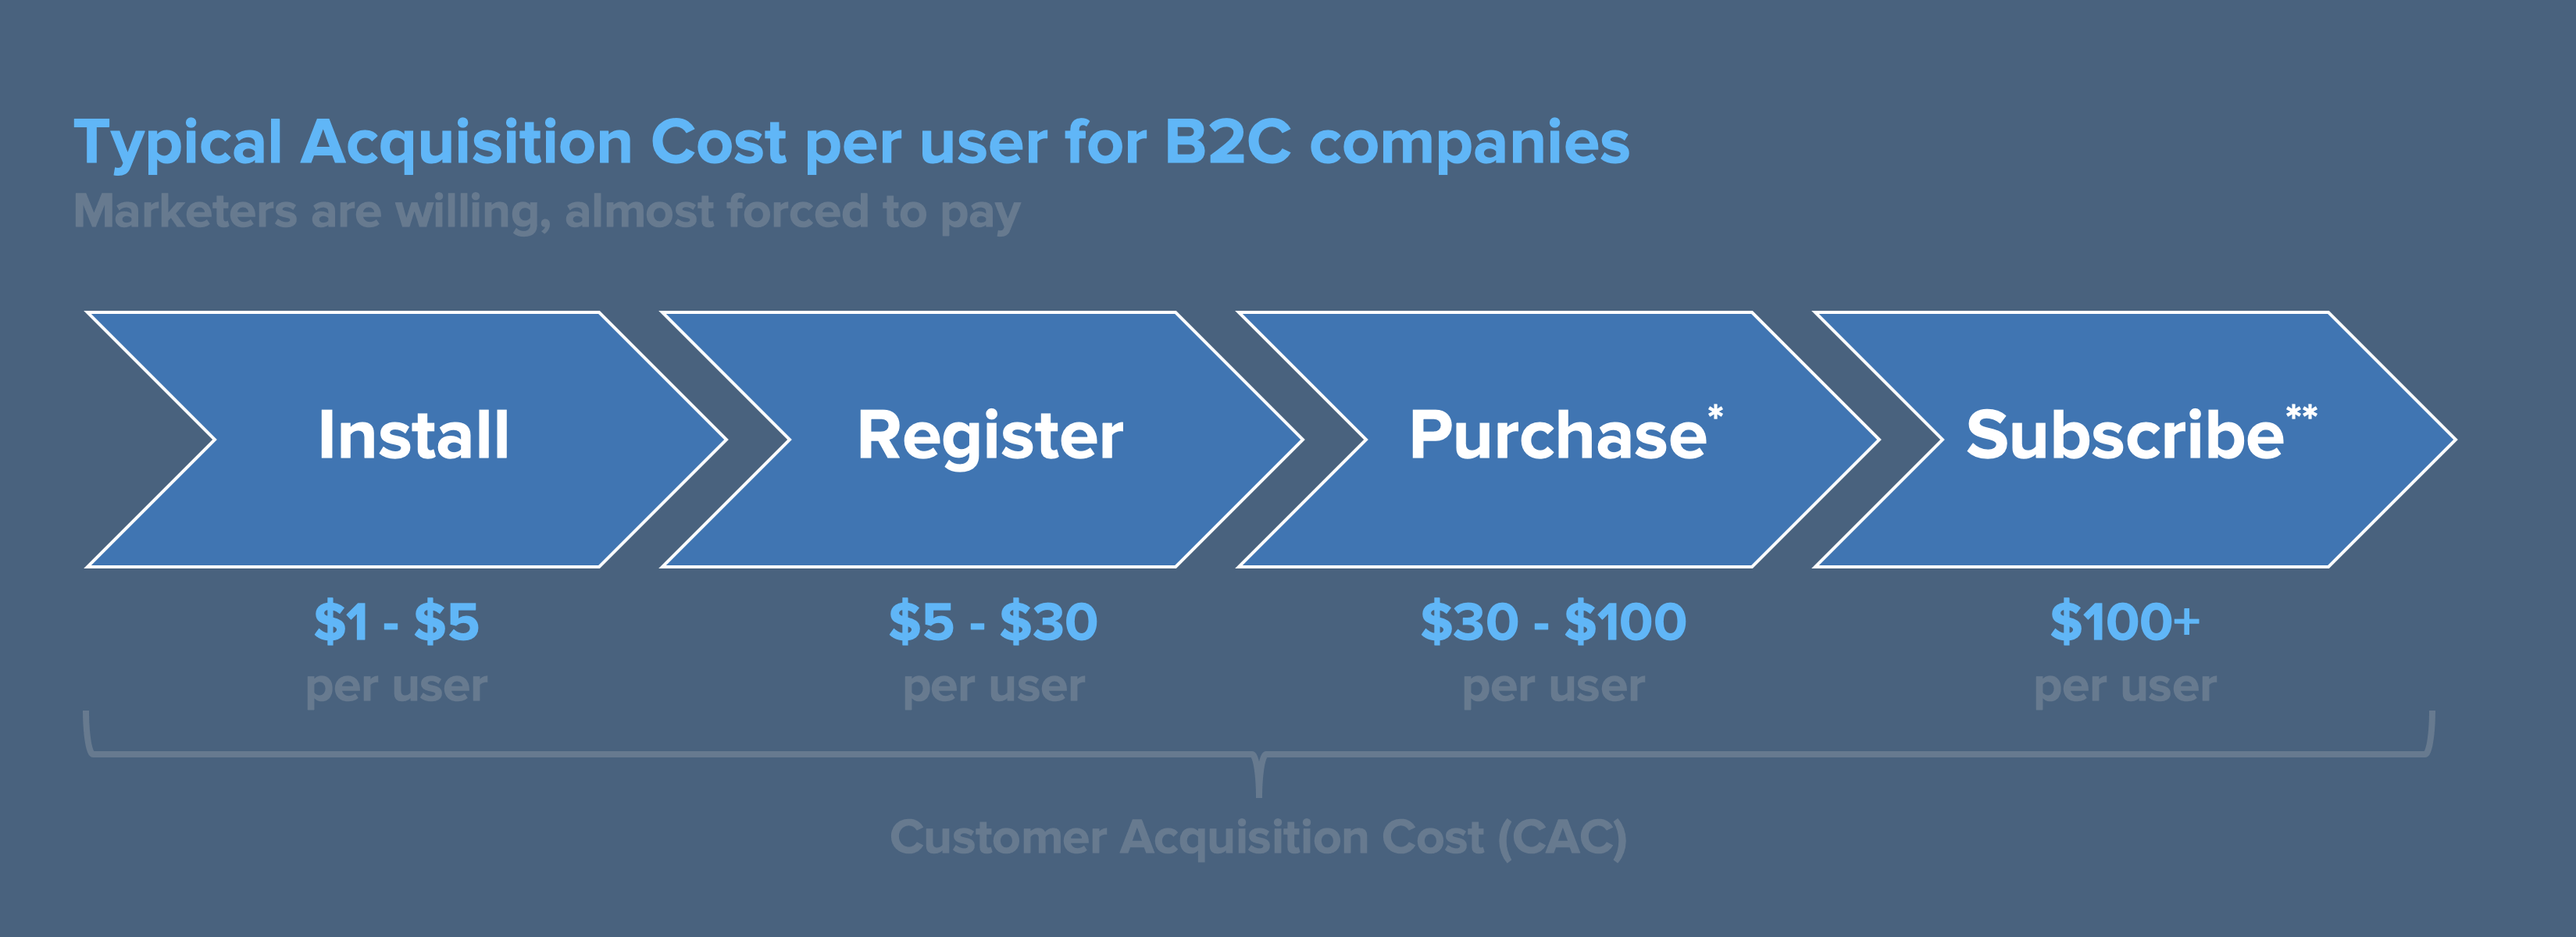 Typical Customer Acquisition Cost per user for B2C companies